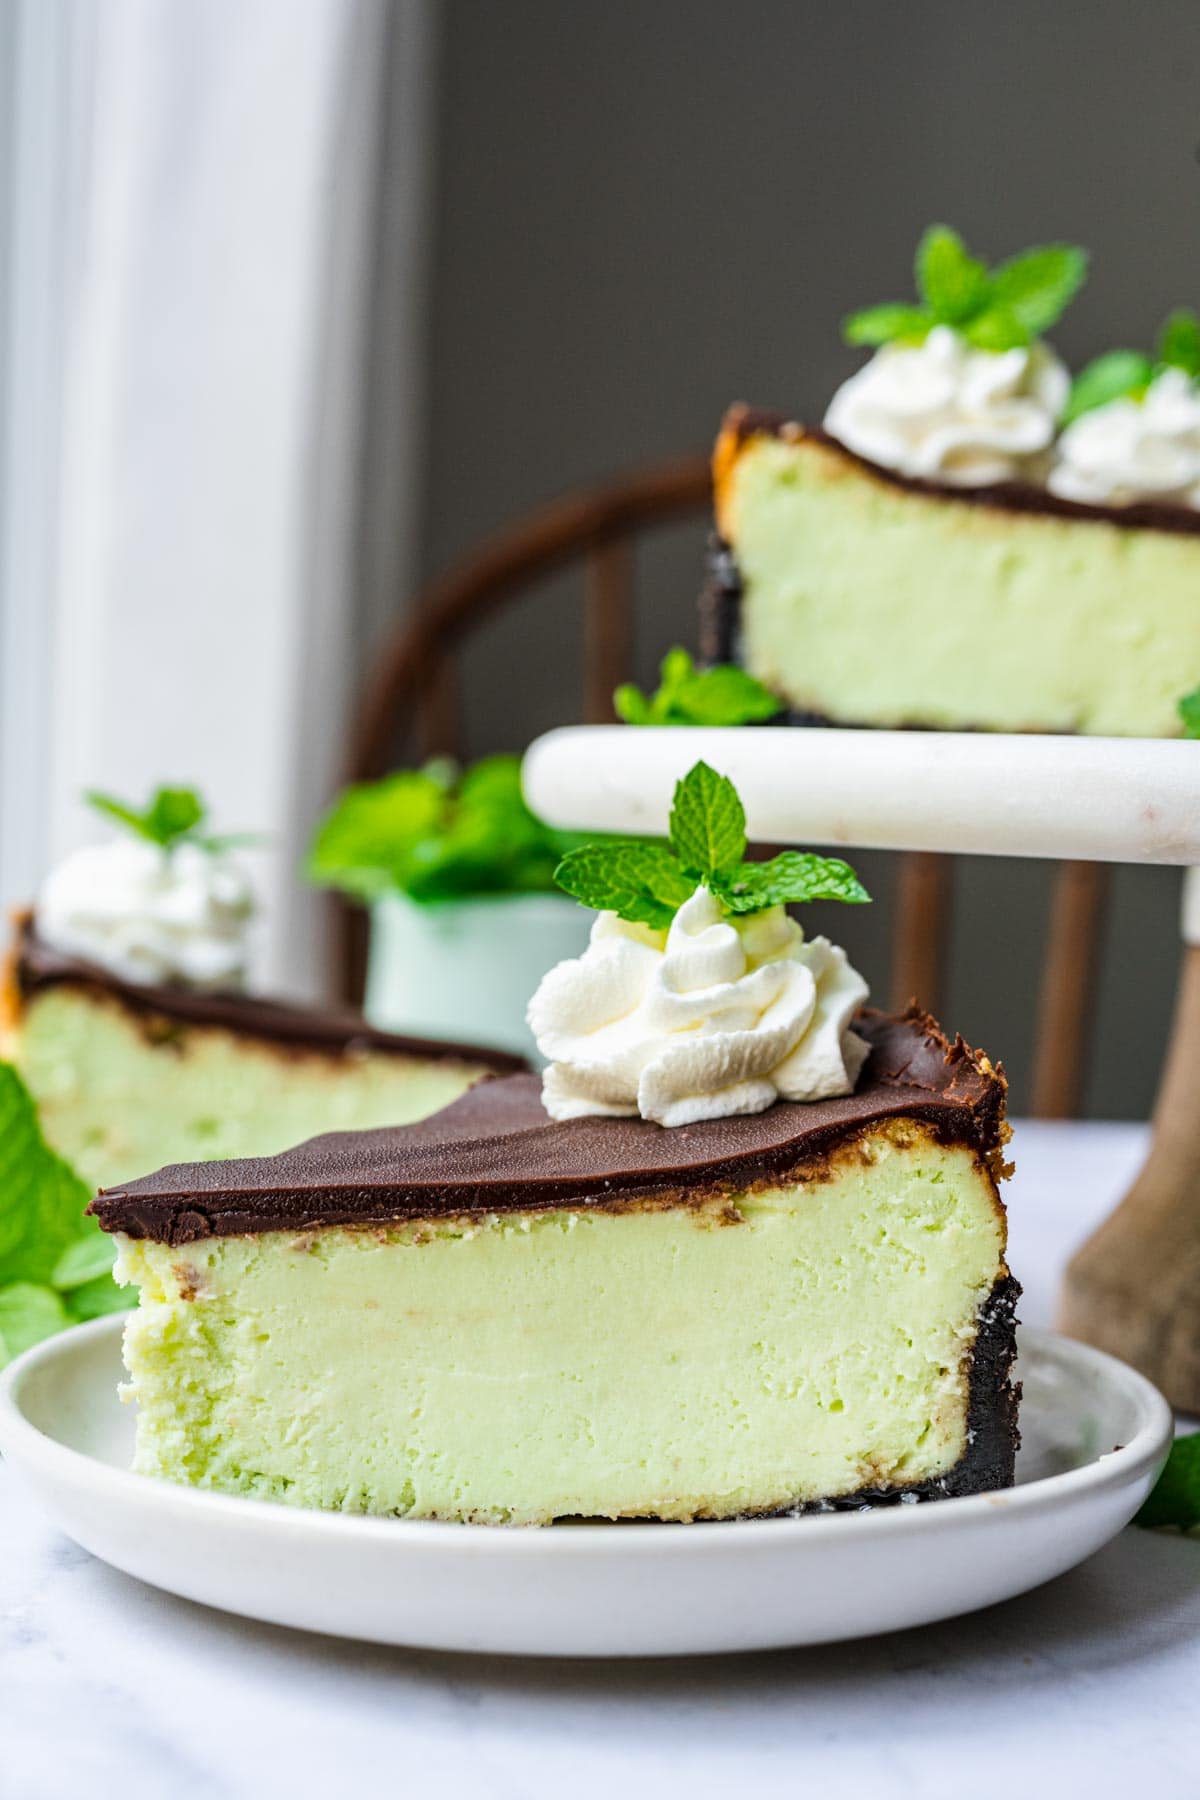 Mint Chocolate Cheesecake slice on serving plate